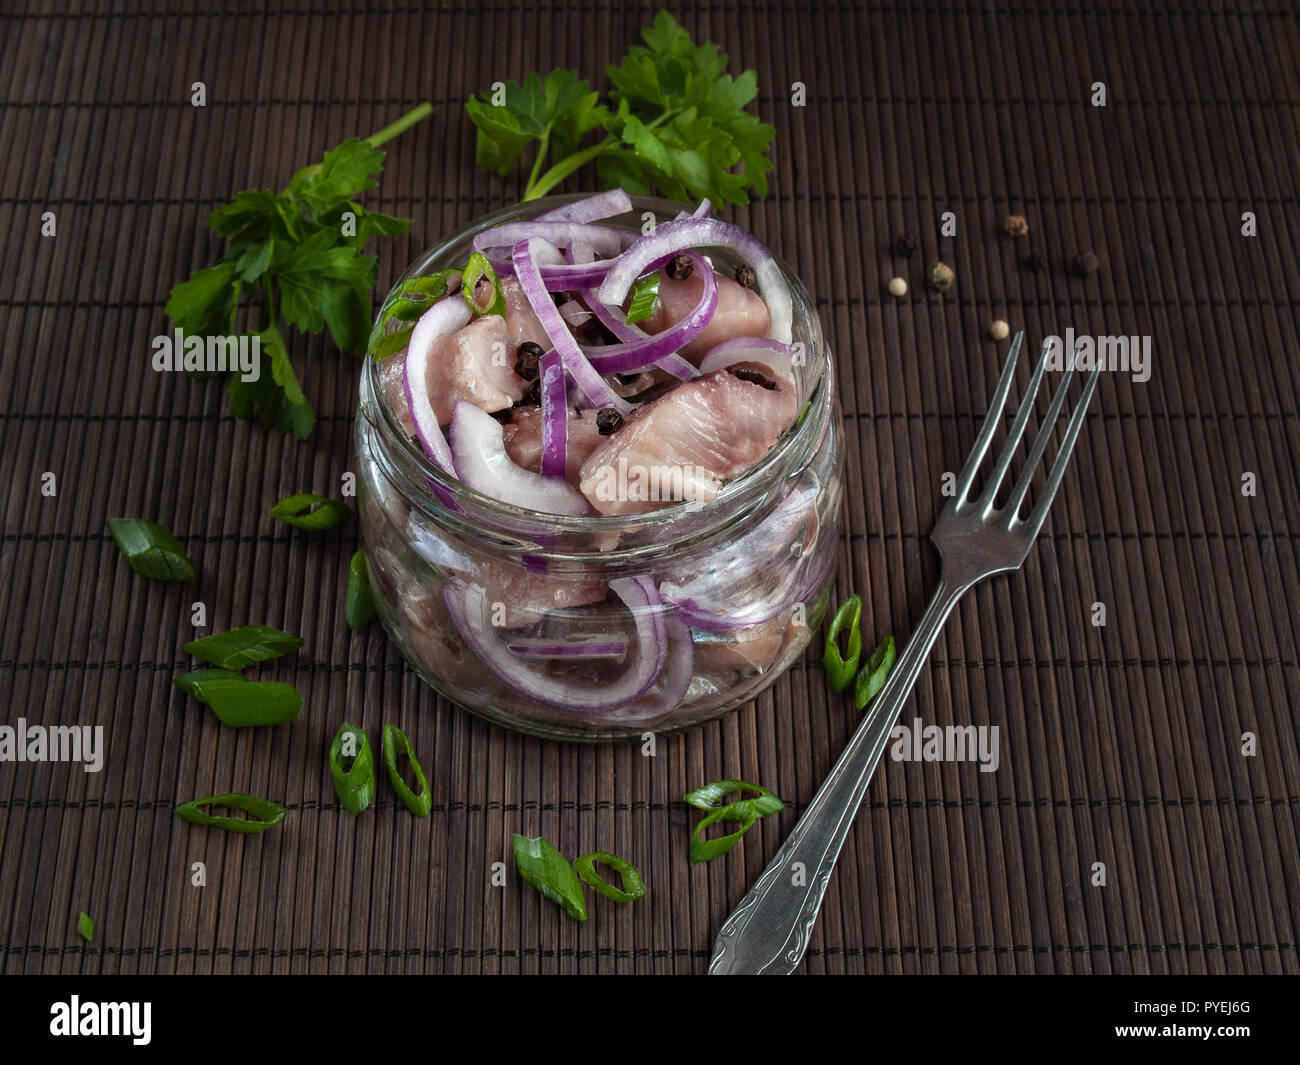 The fillet of salted herring, cut into pieces and sprinkled with ringlets of red onion, lies in a glass jar Stock Photo